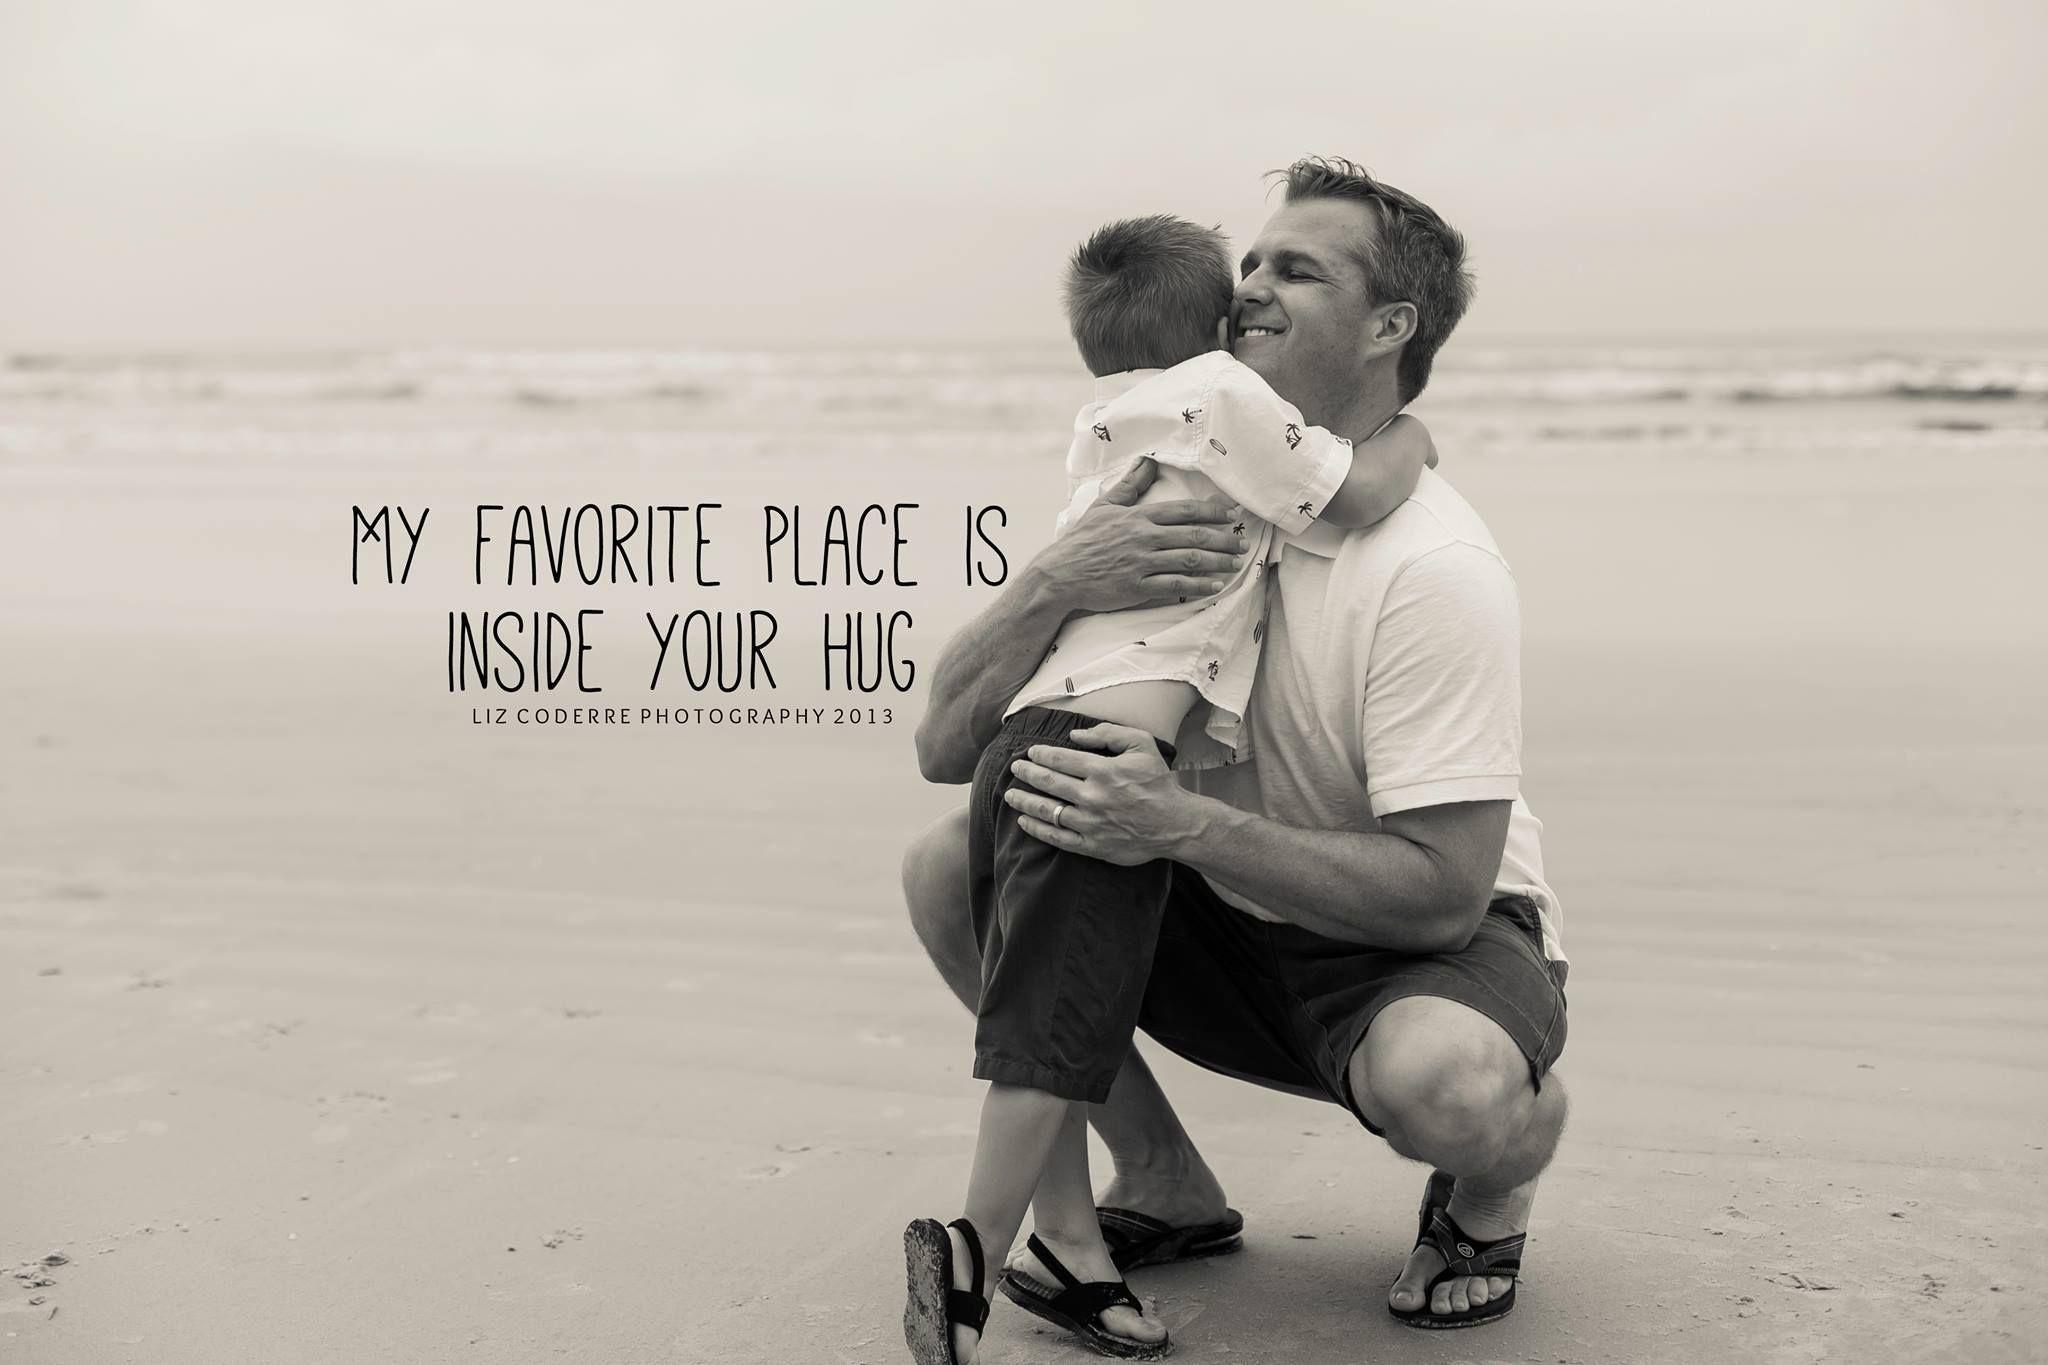 Fatherly Love Wallpaper Awesome My Favorite Place is Inside Your